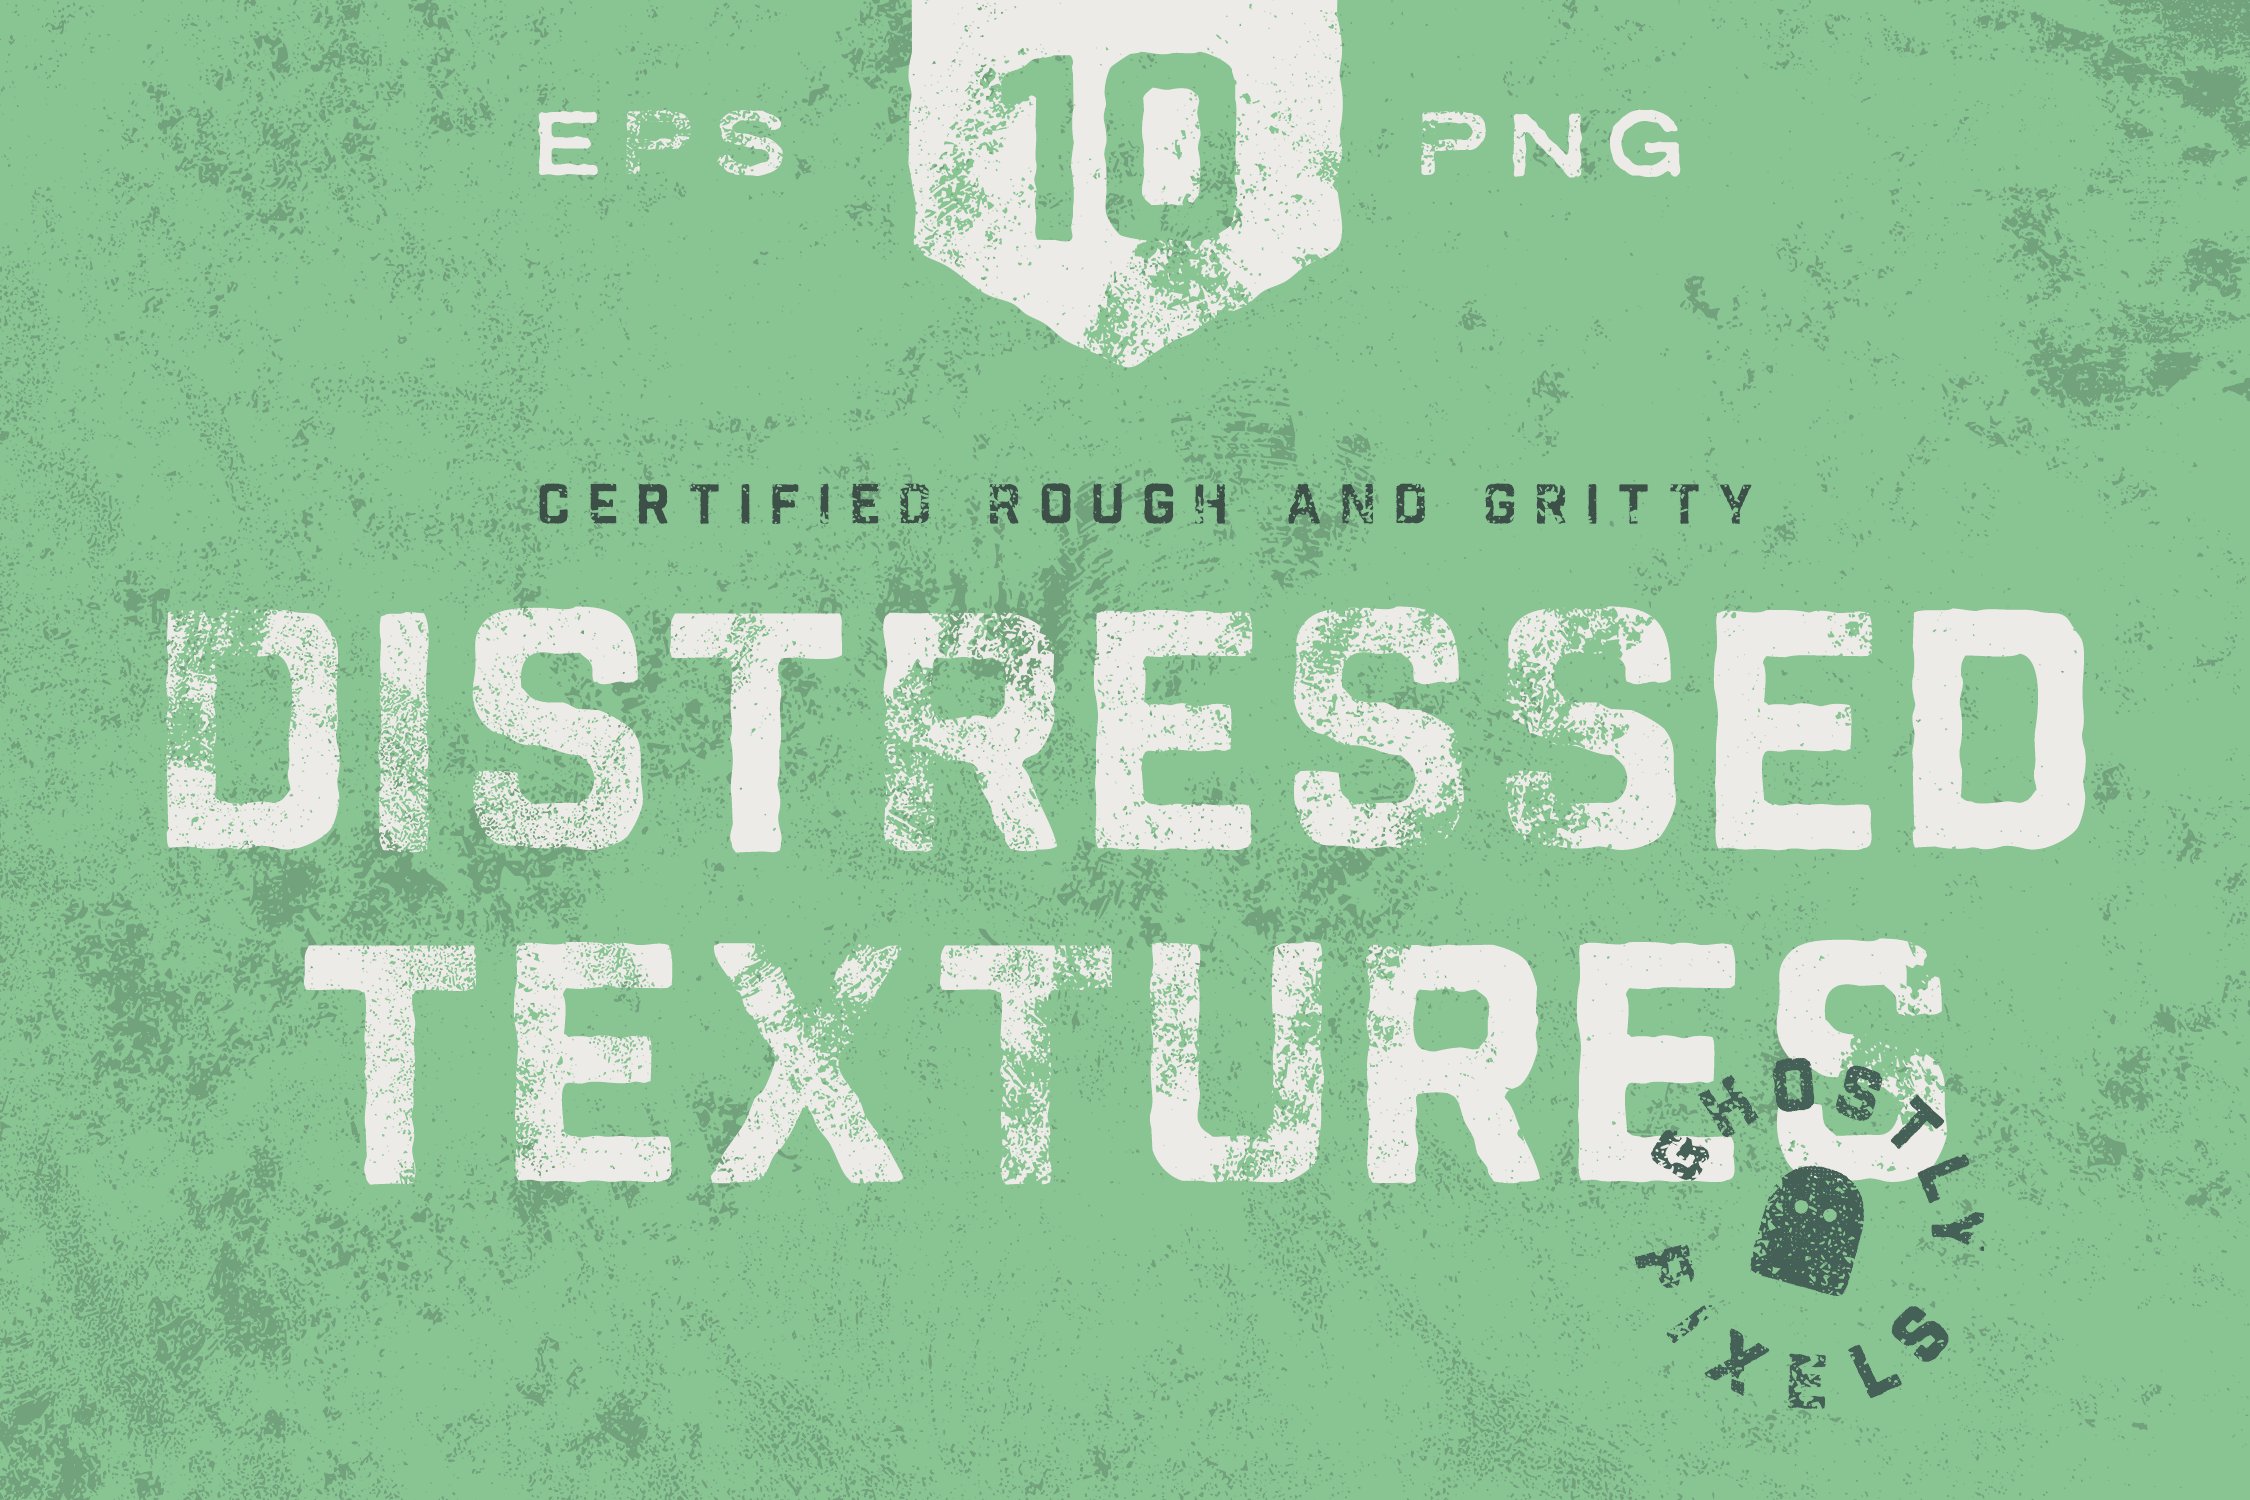 Distressed Textures cover image.